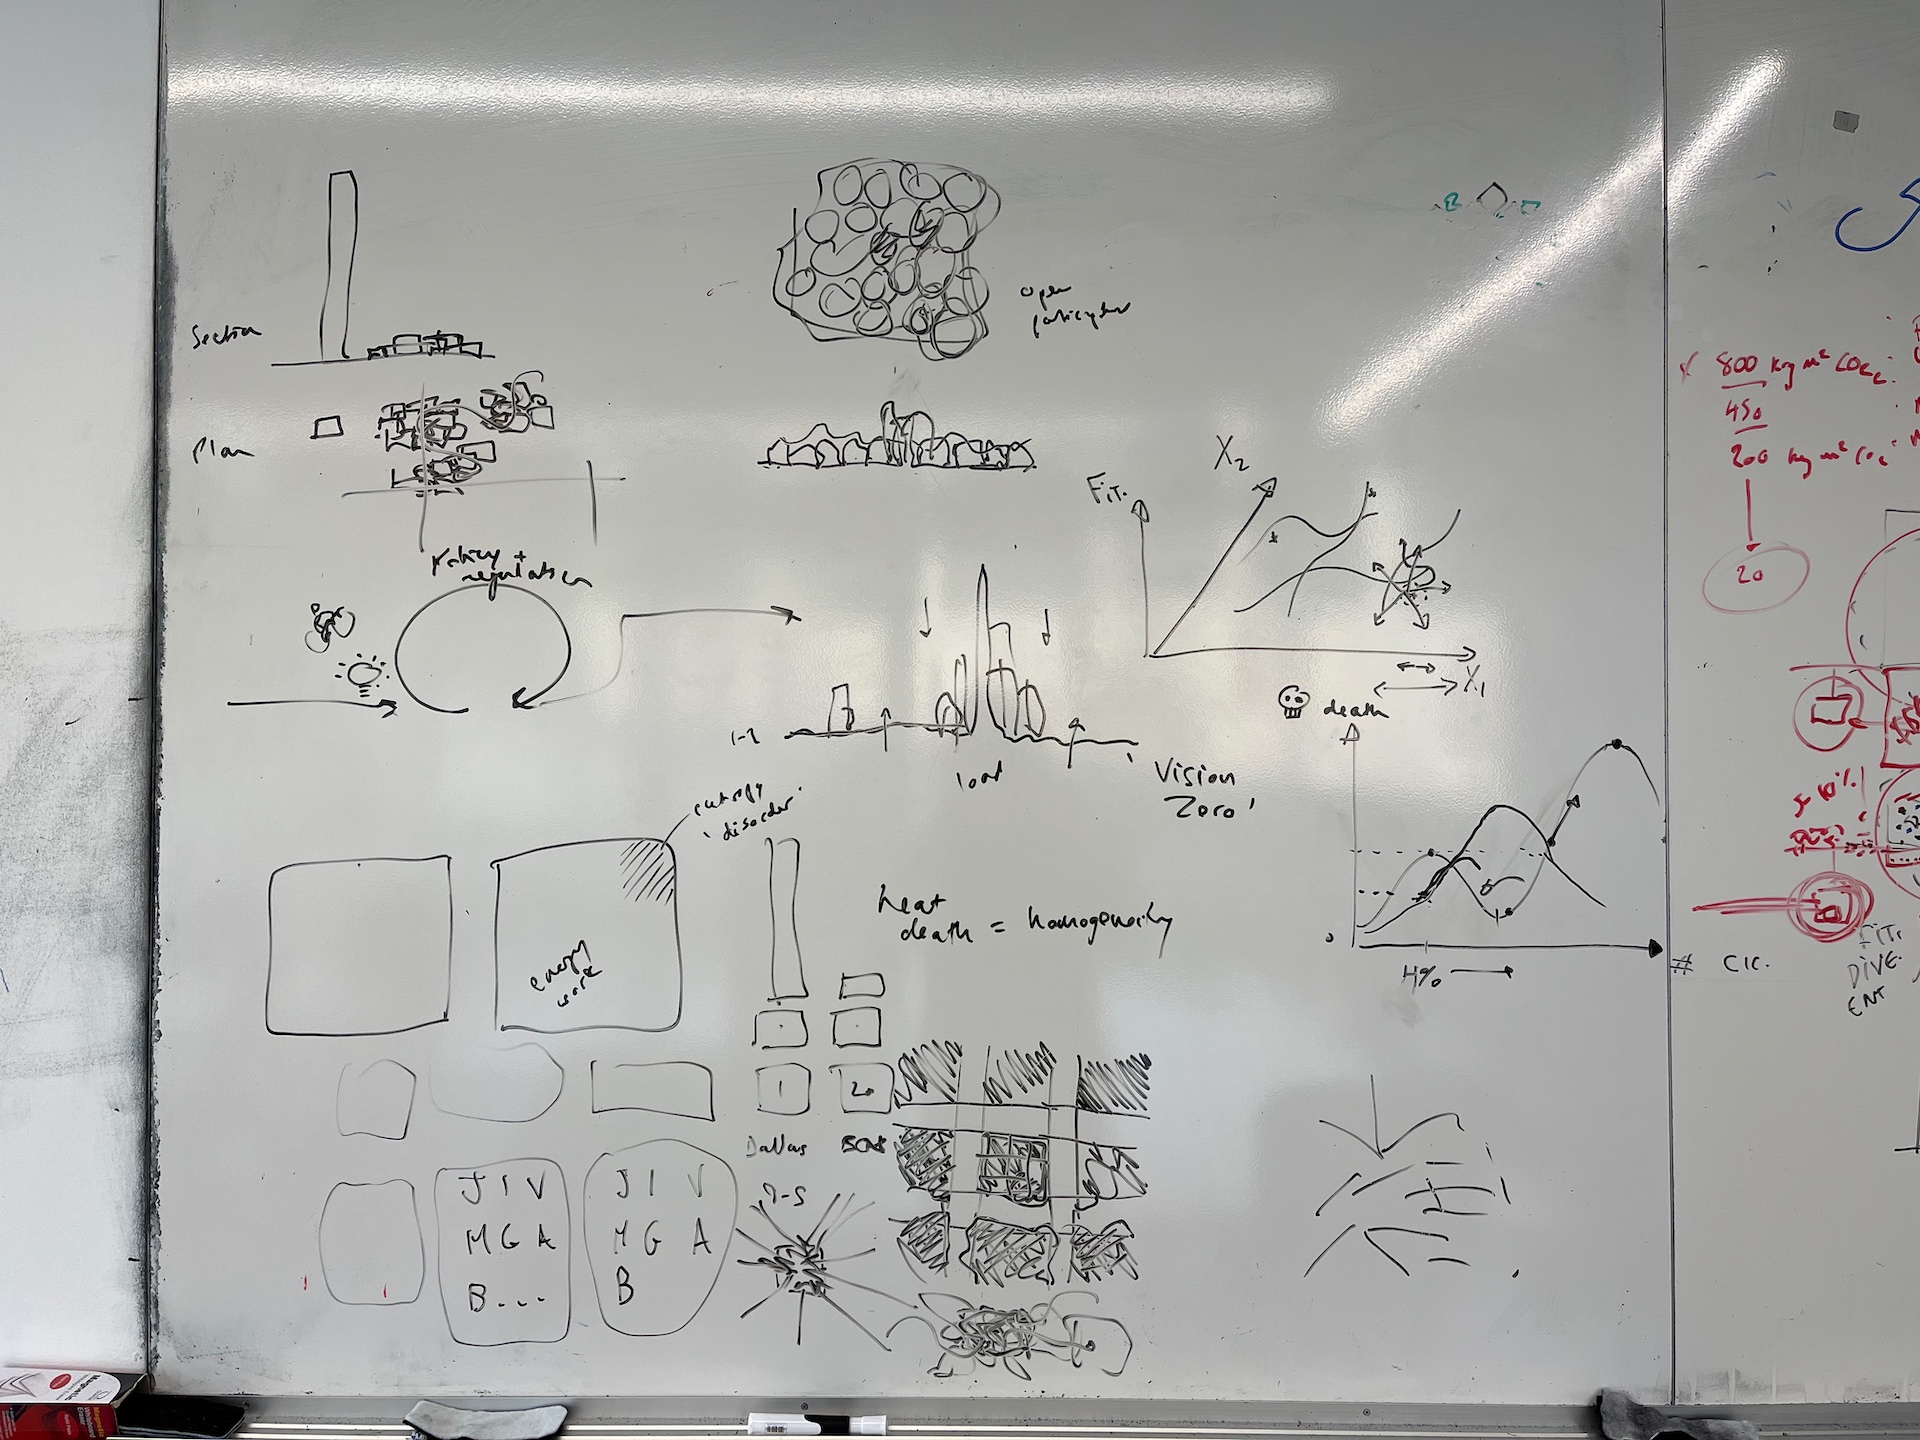 Whiteboard scribbles of complex urban systems